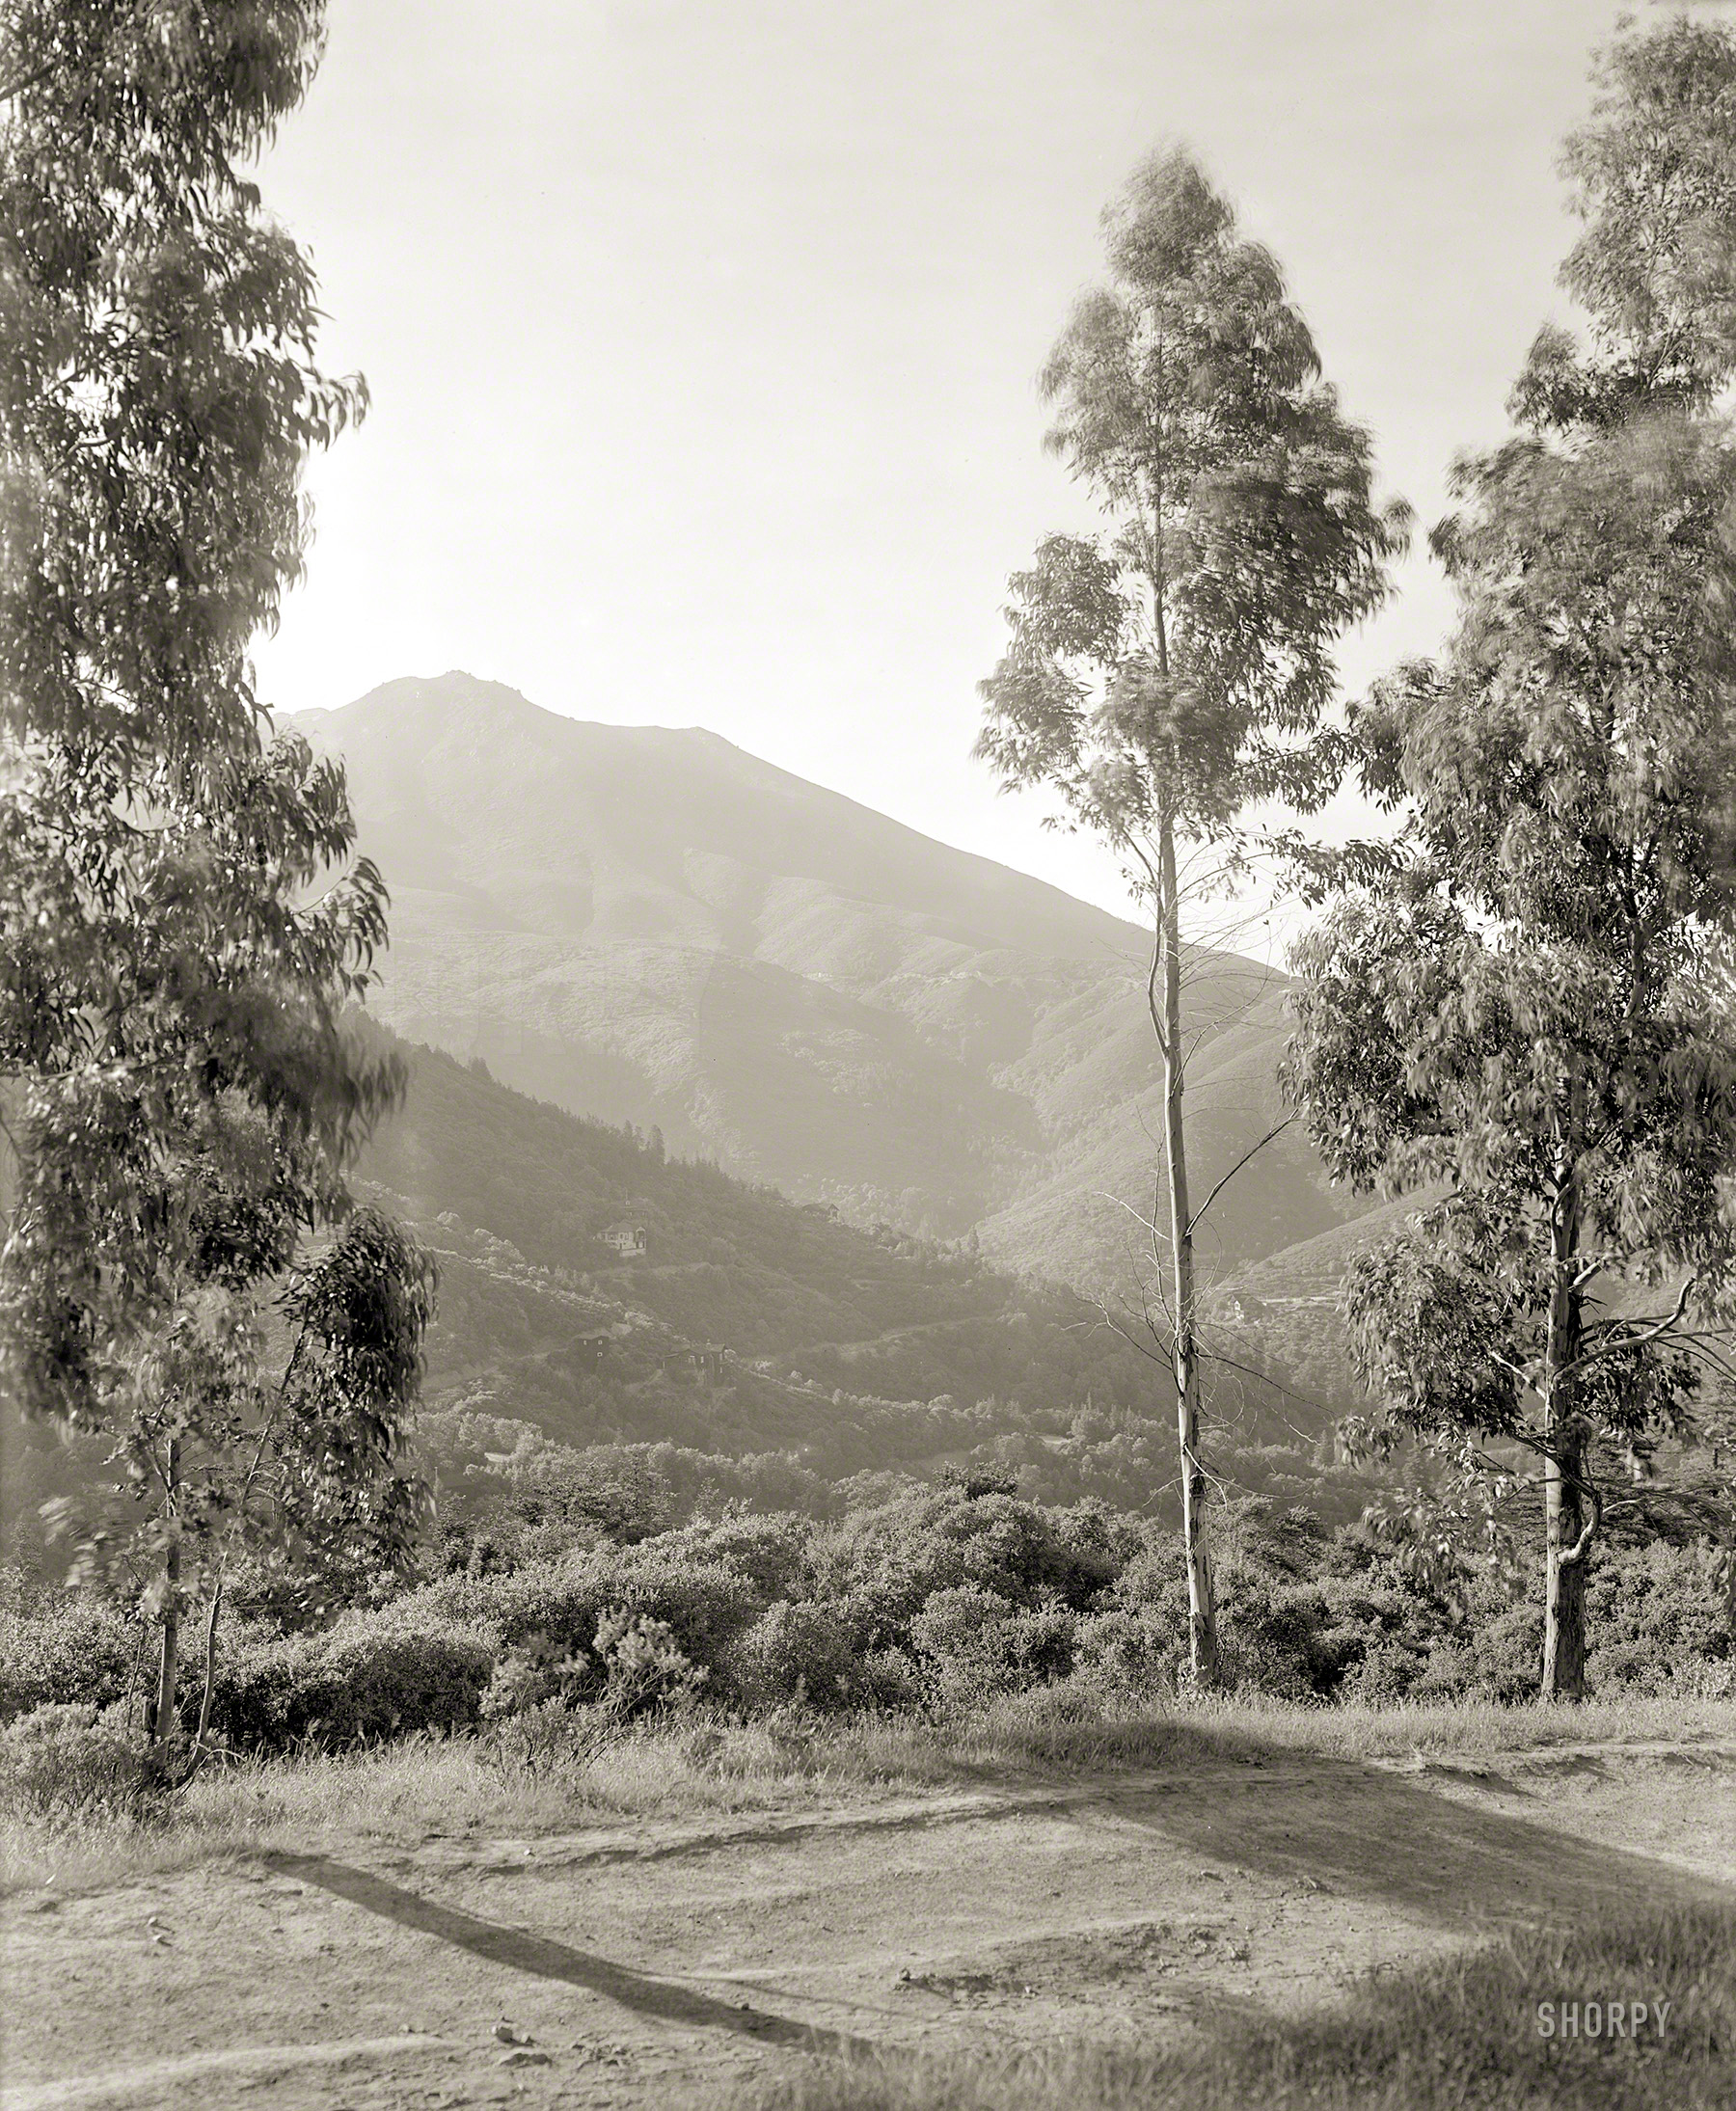 Marin County, California, circa 1910. "Scenic view of Mount Tamalpais." From an Indian name meaning "west hill." 8x10 inch glass negative. View full size.